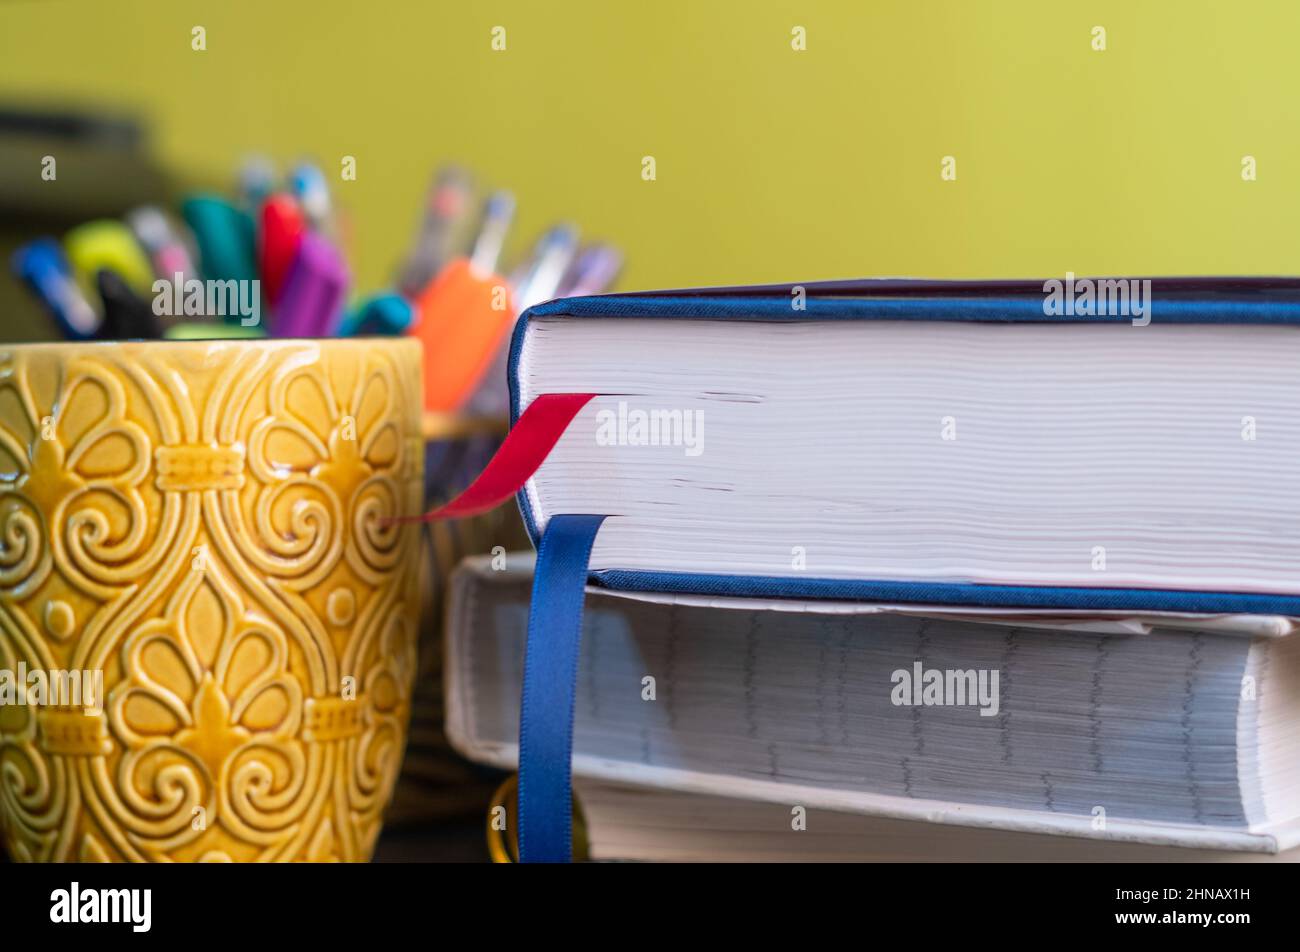 Desk with a stack of books with a yellow mug and pens in the background. Stock Photo